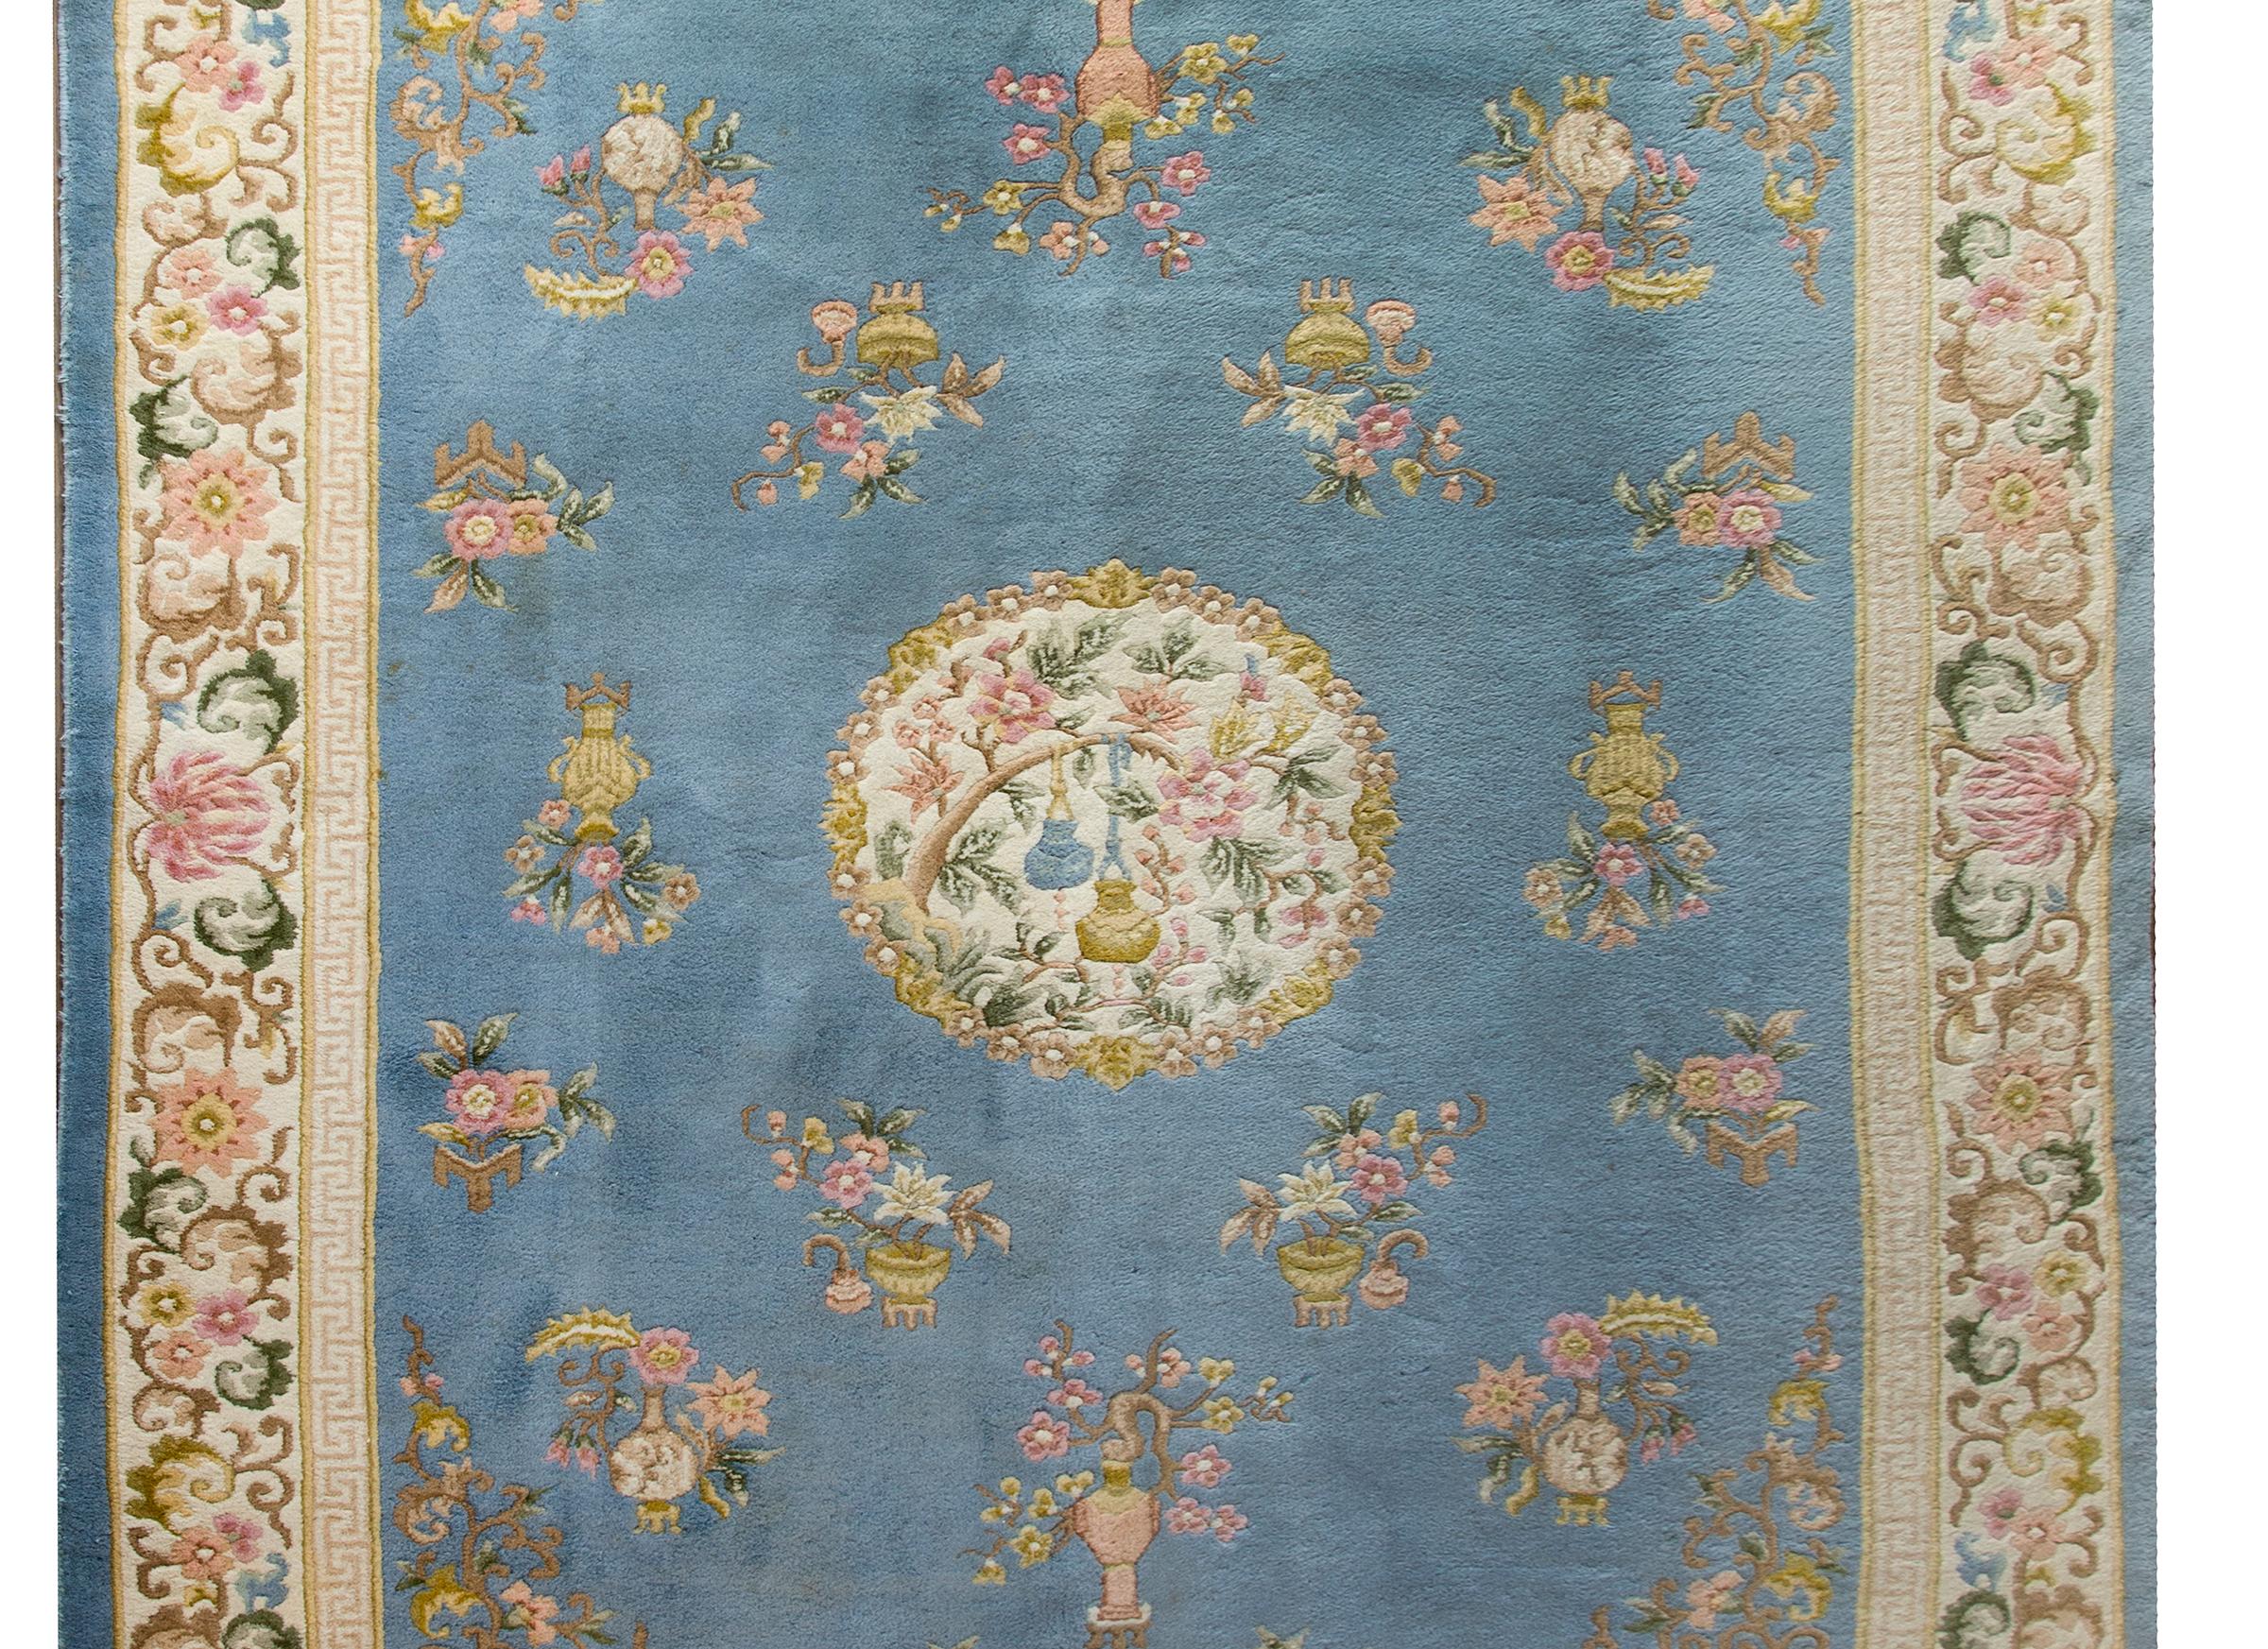 A sweet late 20th century Chinese rug with myriad potted flowers including chrysanthemum, peonies, and prunus blossoms all woven in pale pinks, yellows, greens, and whites, and set against a pale indigo background. The border is wild with